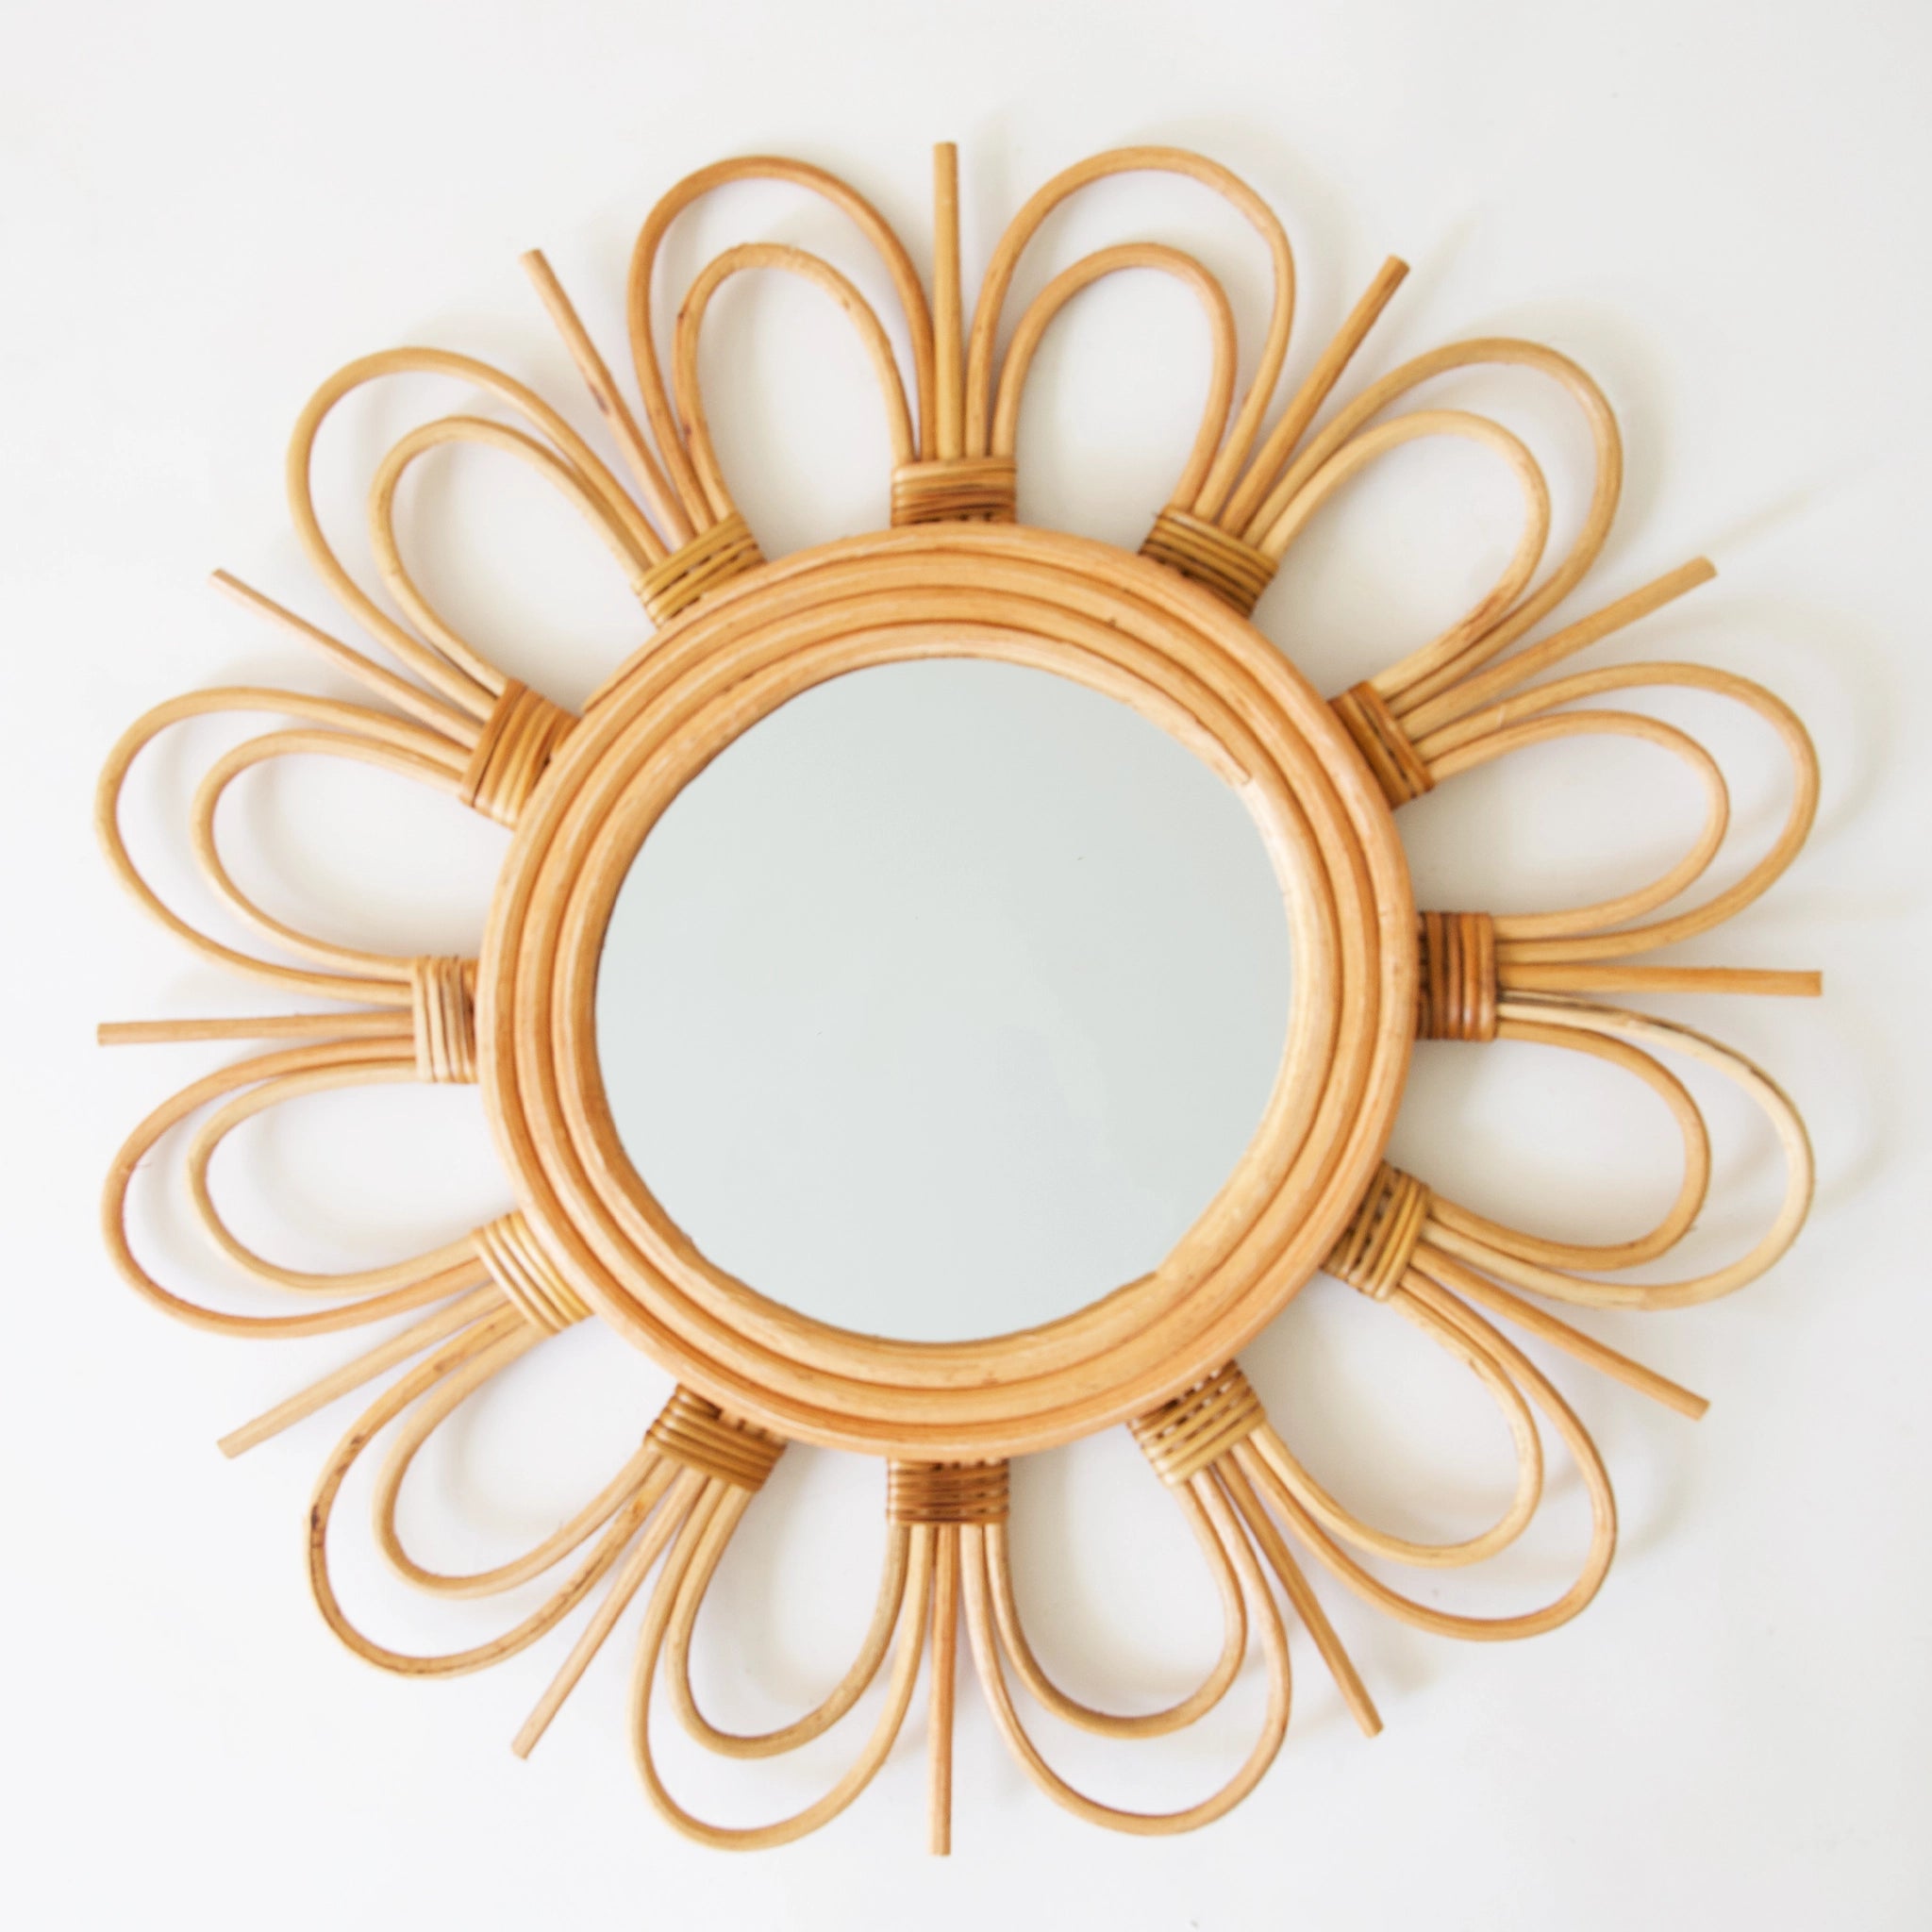 Hanging in front of a white background is a rattan mirror. The mirror is round with three layers of rattan surrounding the outside of the mirror. Around the last layer is a row of small arched with a larger arch over. In between the arches is a straight piece of rattan.